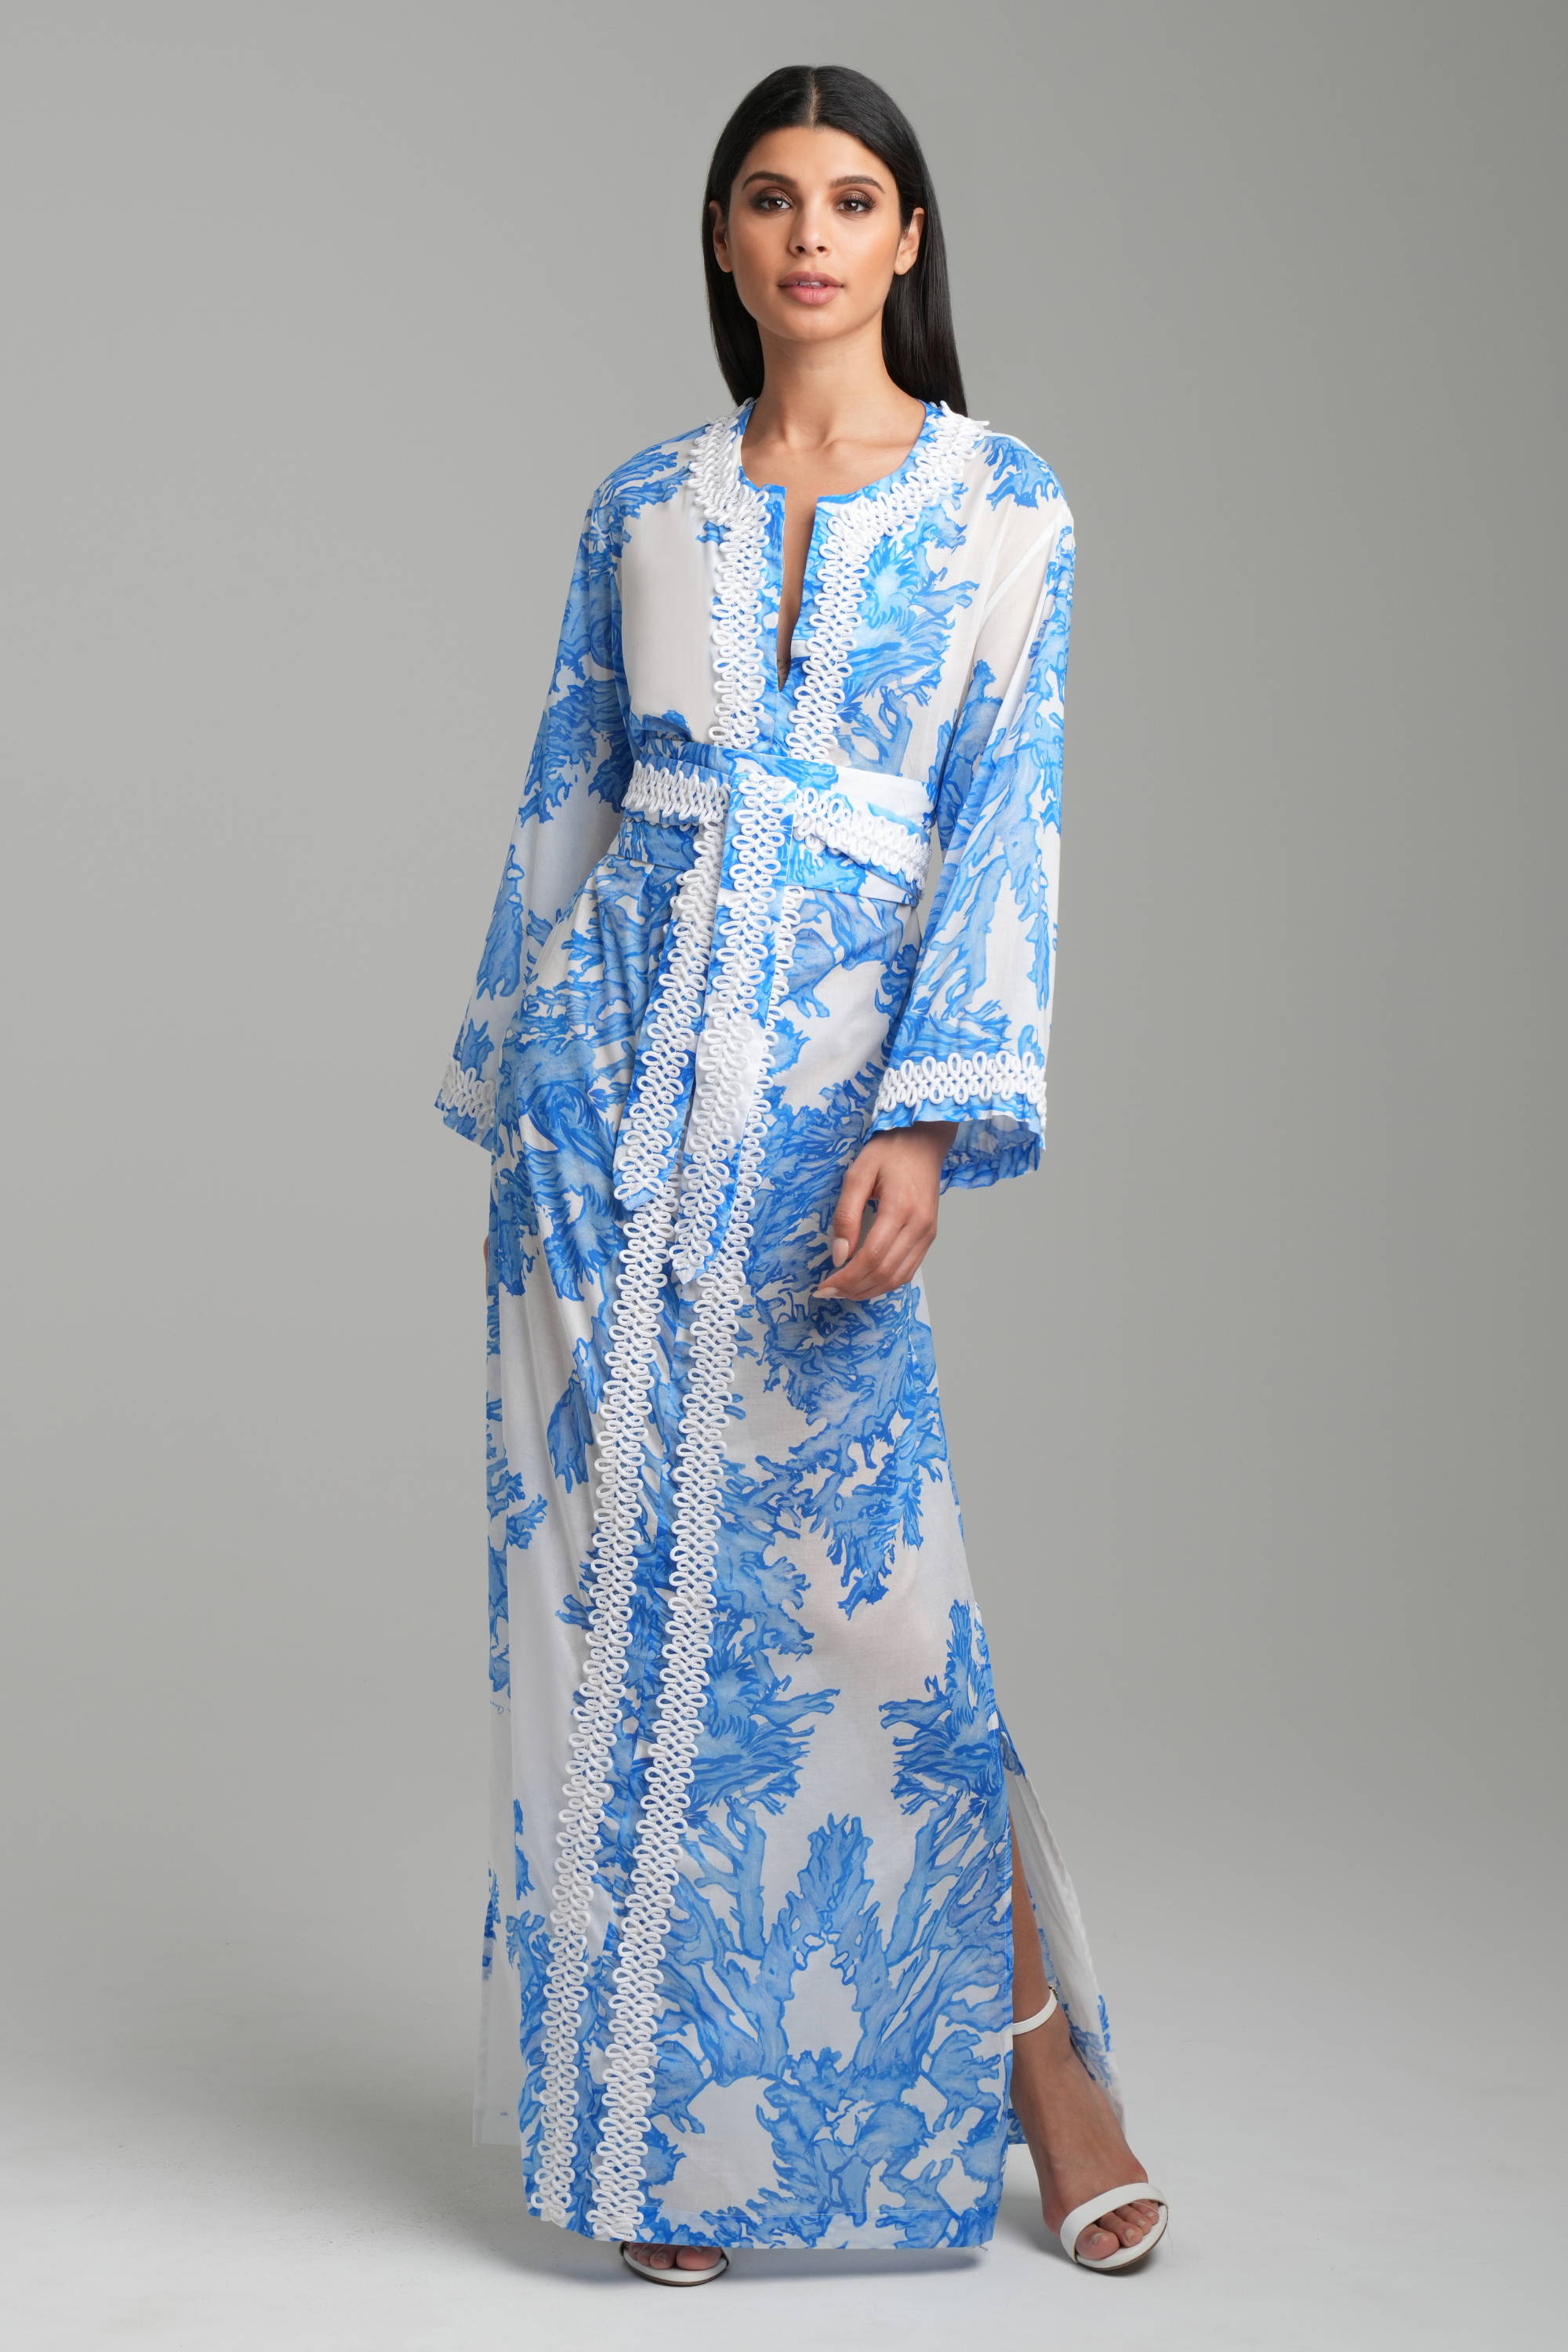 Woman wearing blue coral printed kaftan with white trim and matching belt by Ala von Auersperg